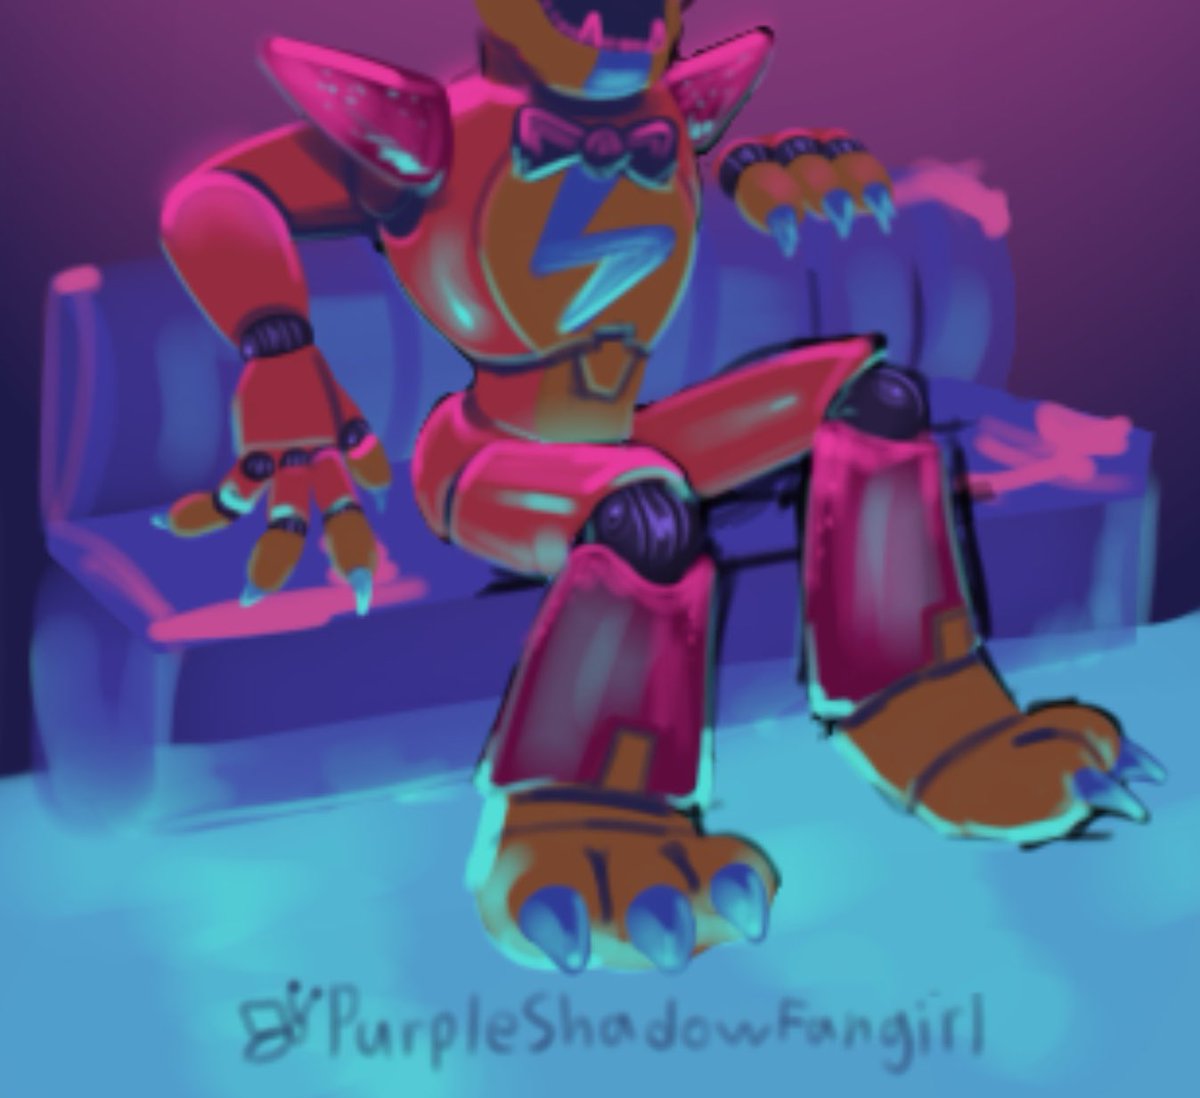 🪑 ・ Guess who finished a doodle last night

never planned on rendering his face so take it as another headless jab 

#glamrockfreddy #fnafsecuritybreach #fnafsb #fivenightsatfreddys #fnaffanart #fnaf